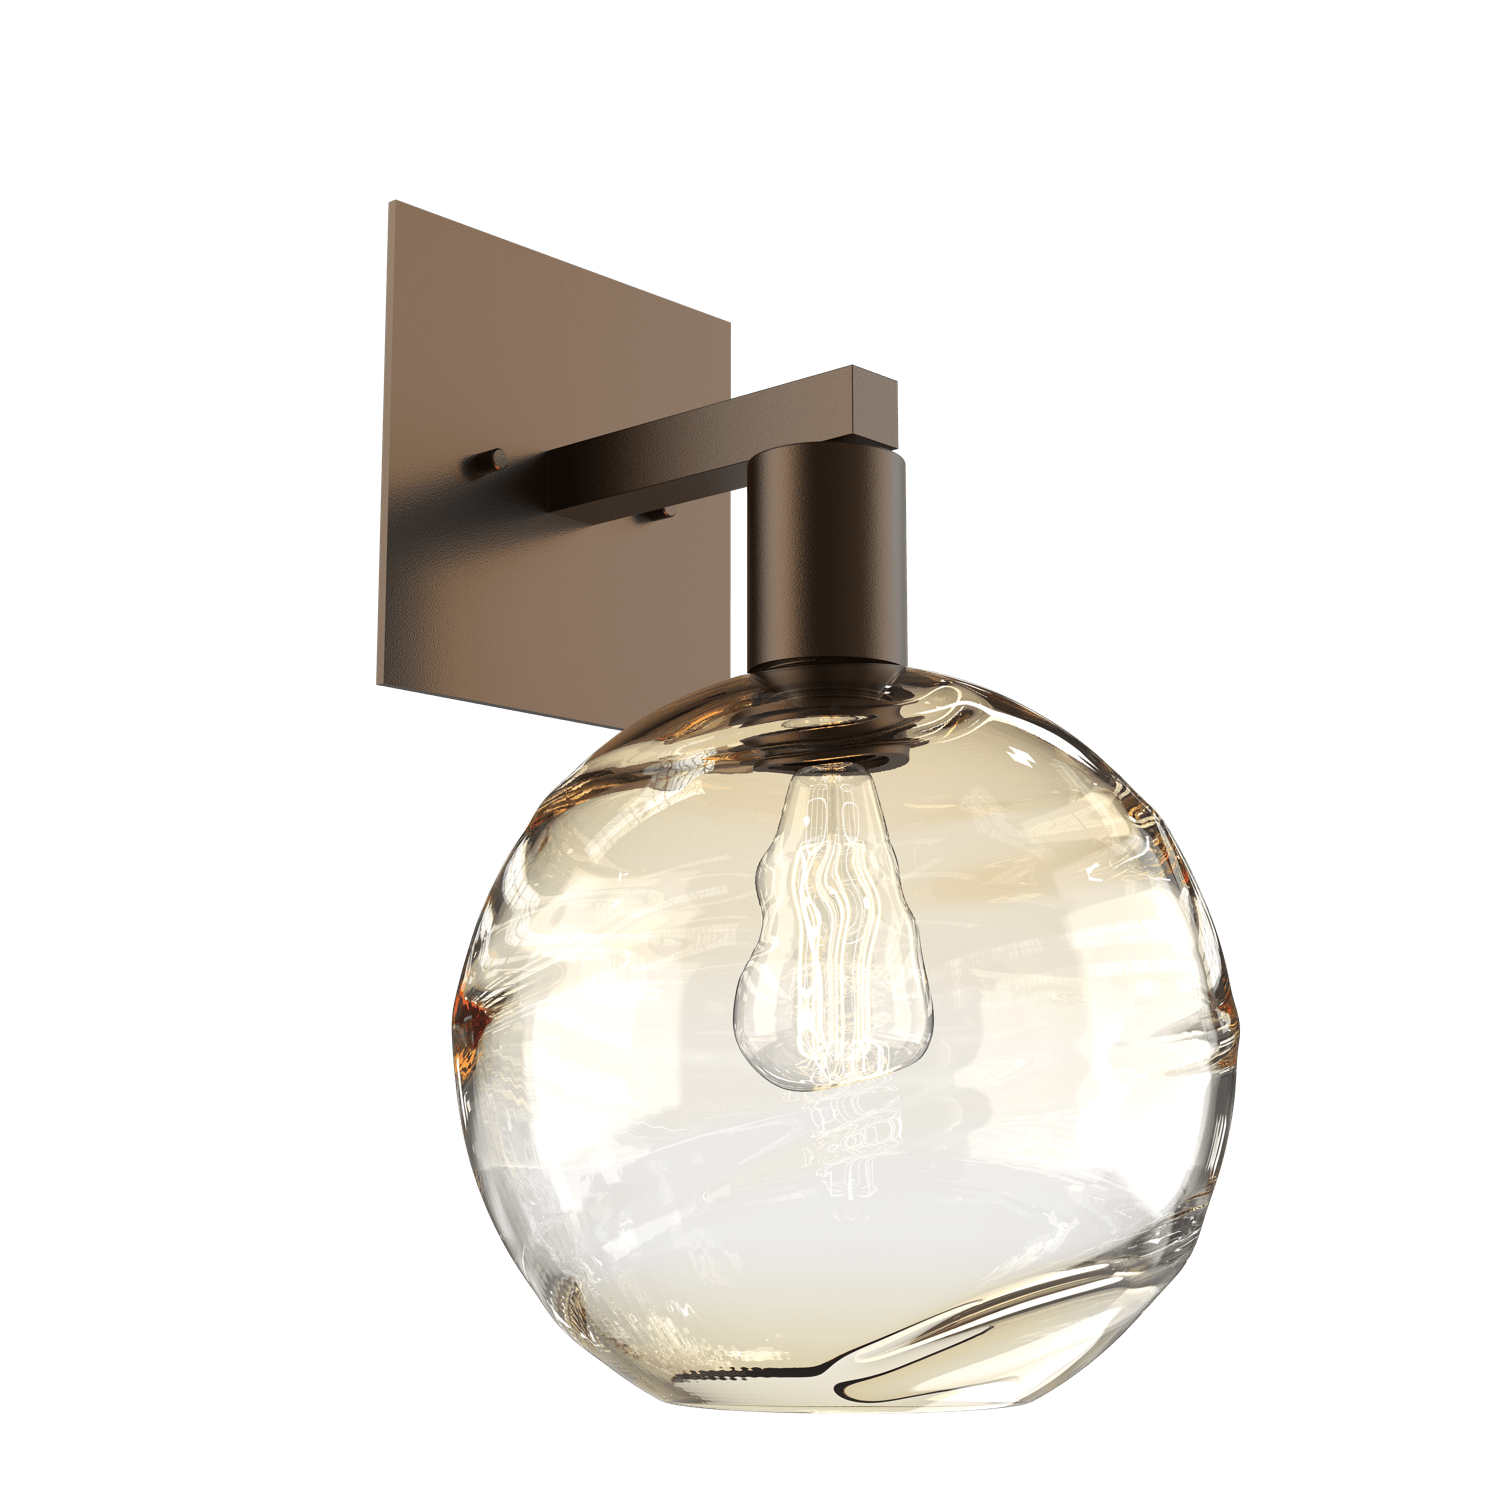 IDB0047-14-FB-OA-Hammerton-Studio-Optic-Blown-Glass-Terra-wall-sconce-with-flat-bronze-finish-and-optic-amber-blown-glass-shades-and-incandescent-lamping